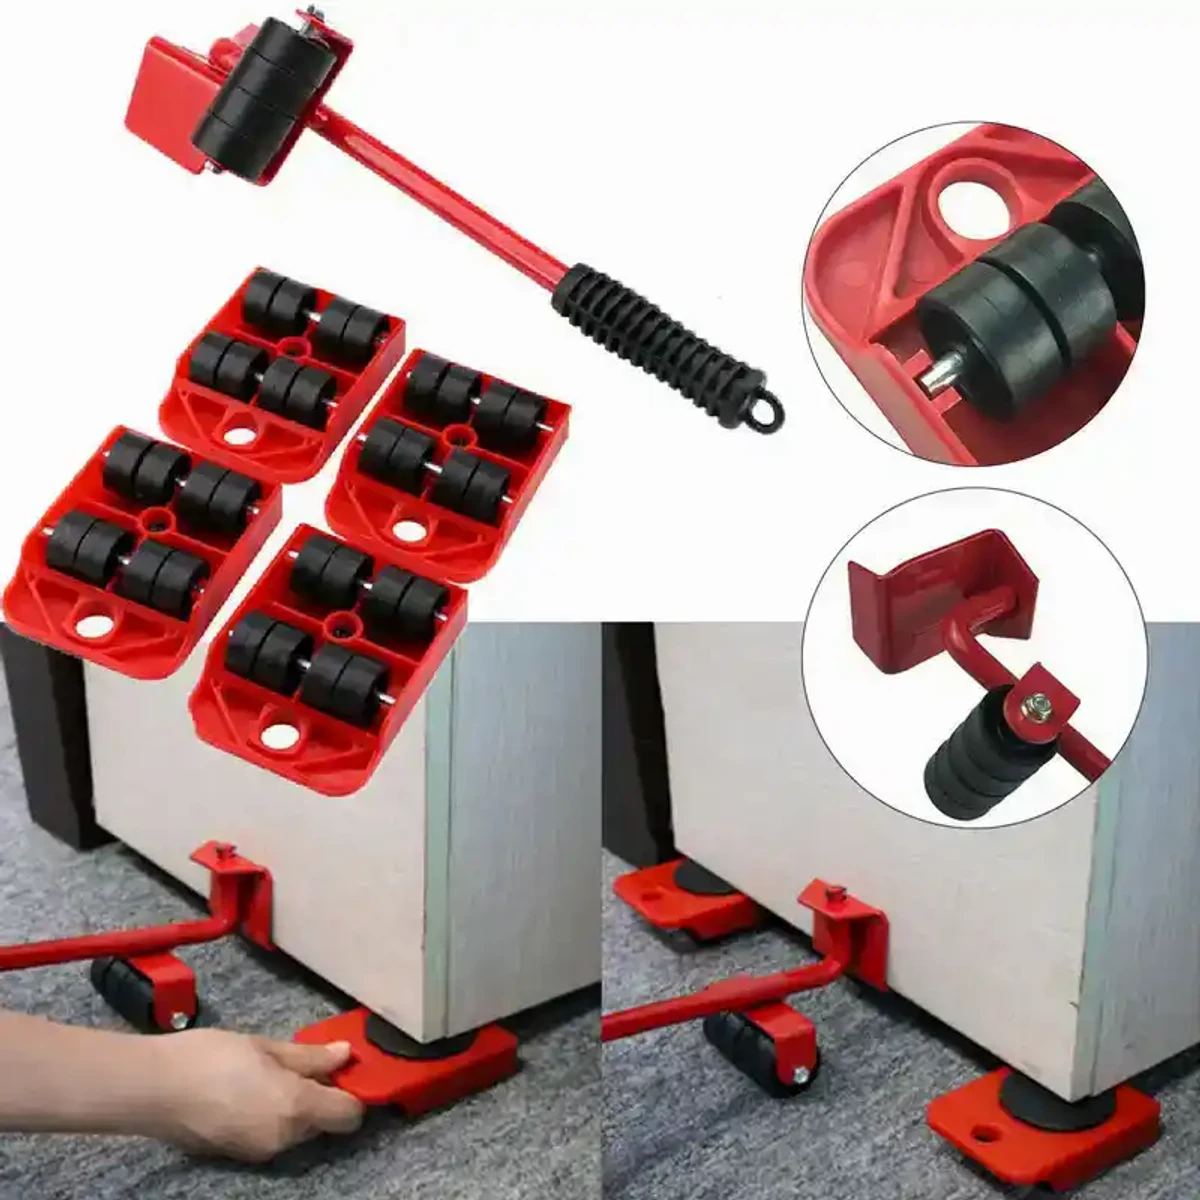 HEAVY FURNITURE MOVING LIFTER 4 MOVING SLIDERS MTS